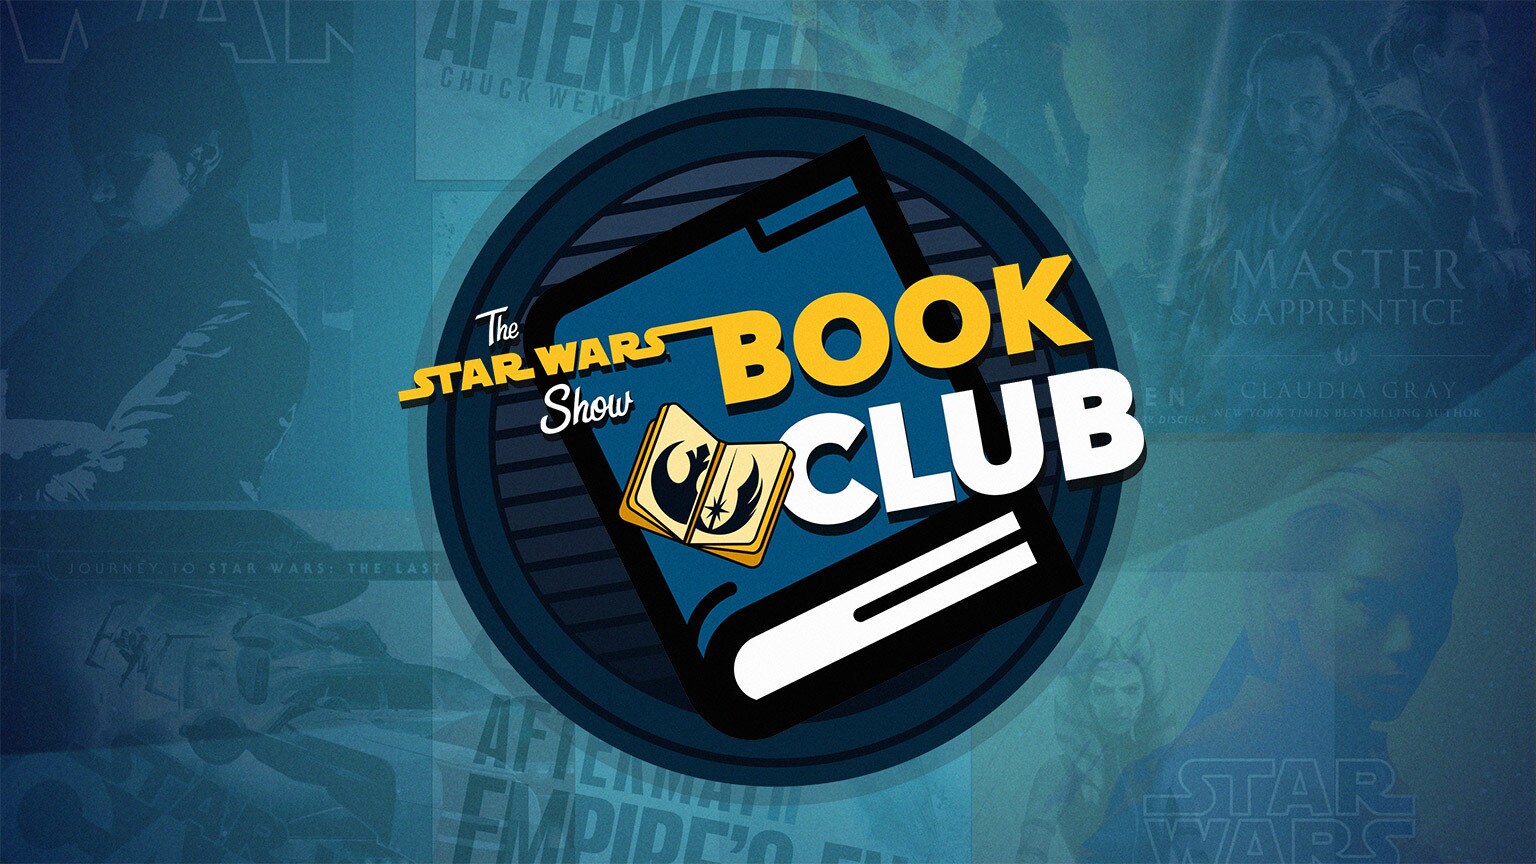 Read Along with The Star Wars Show Book Club